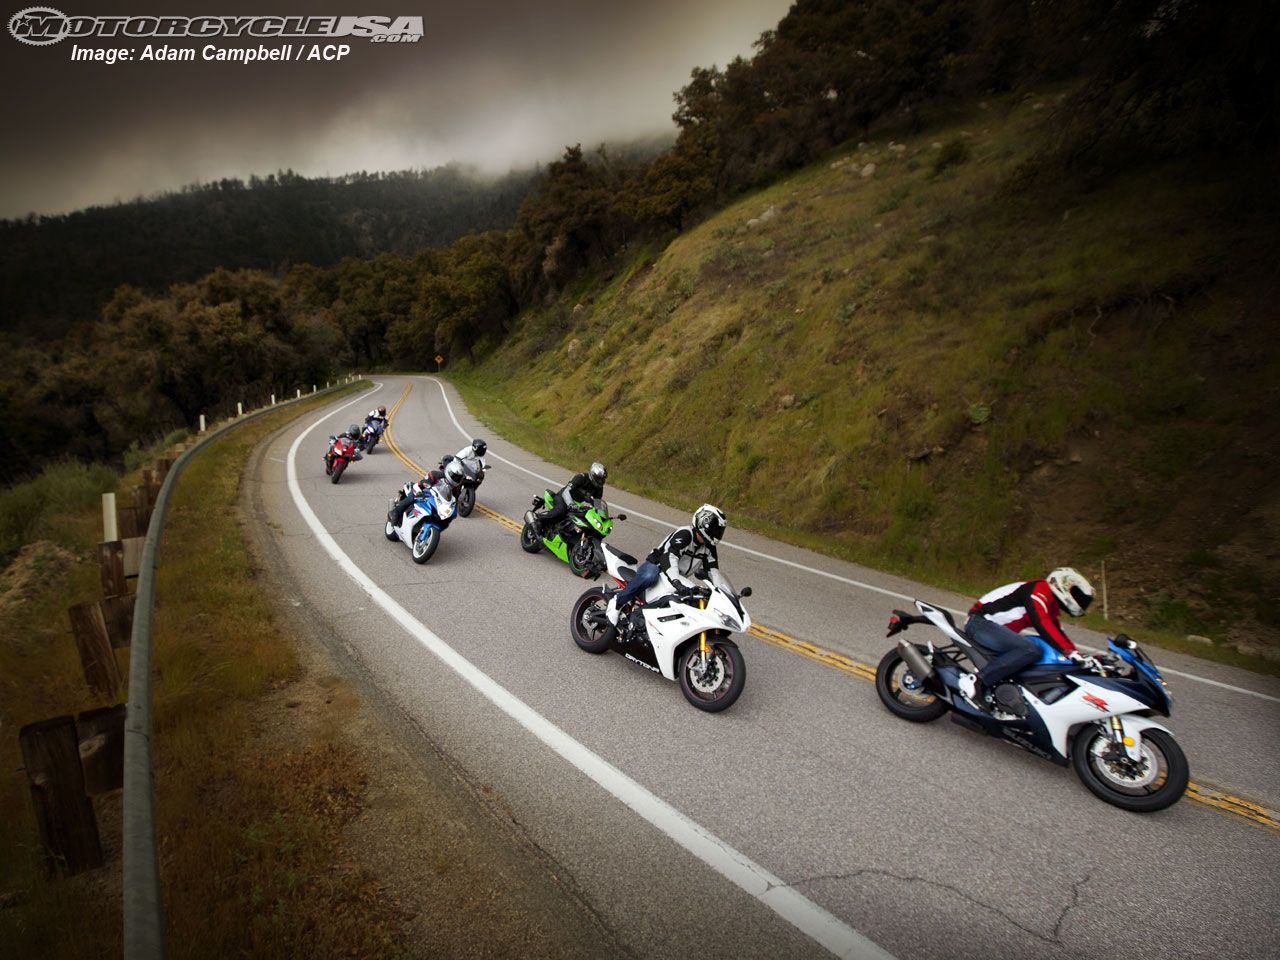 Supersport Sportbike Shootout Commences - Motorcycle USA